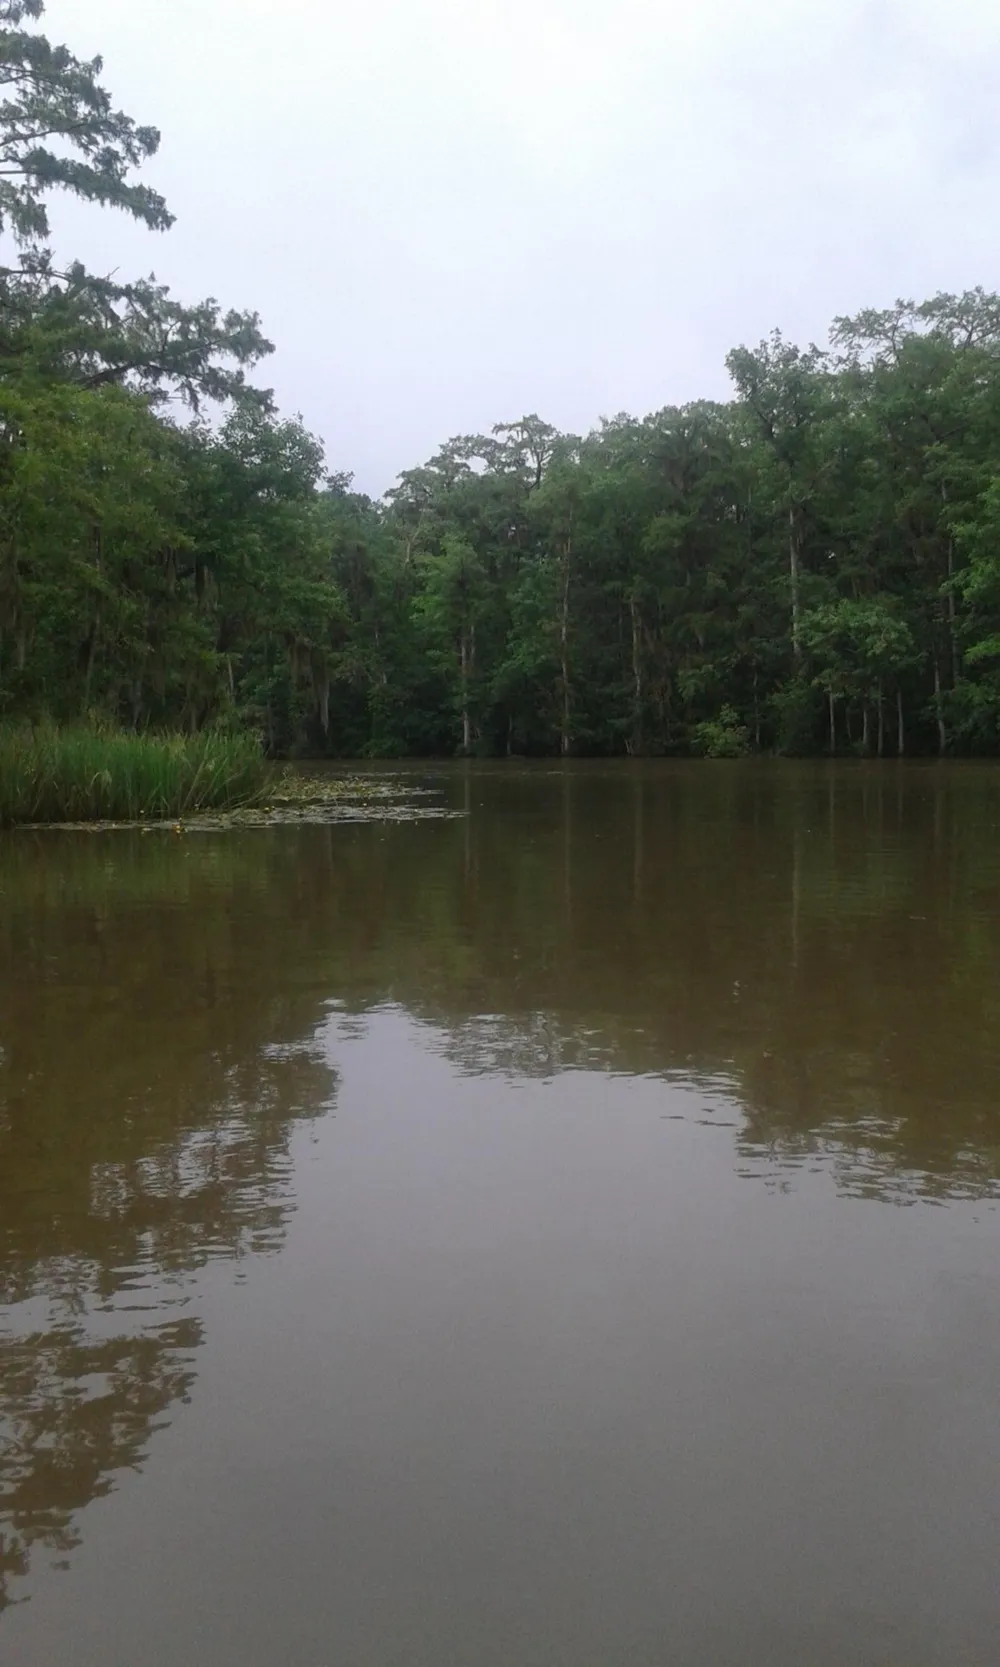 The image shows a calm body of water surrounded by a dense green forest under an overcast sky